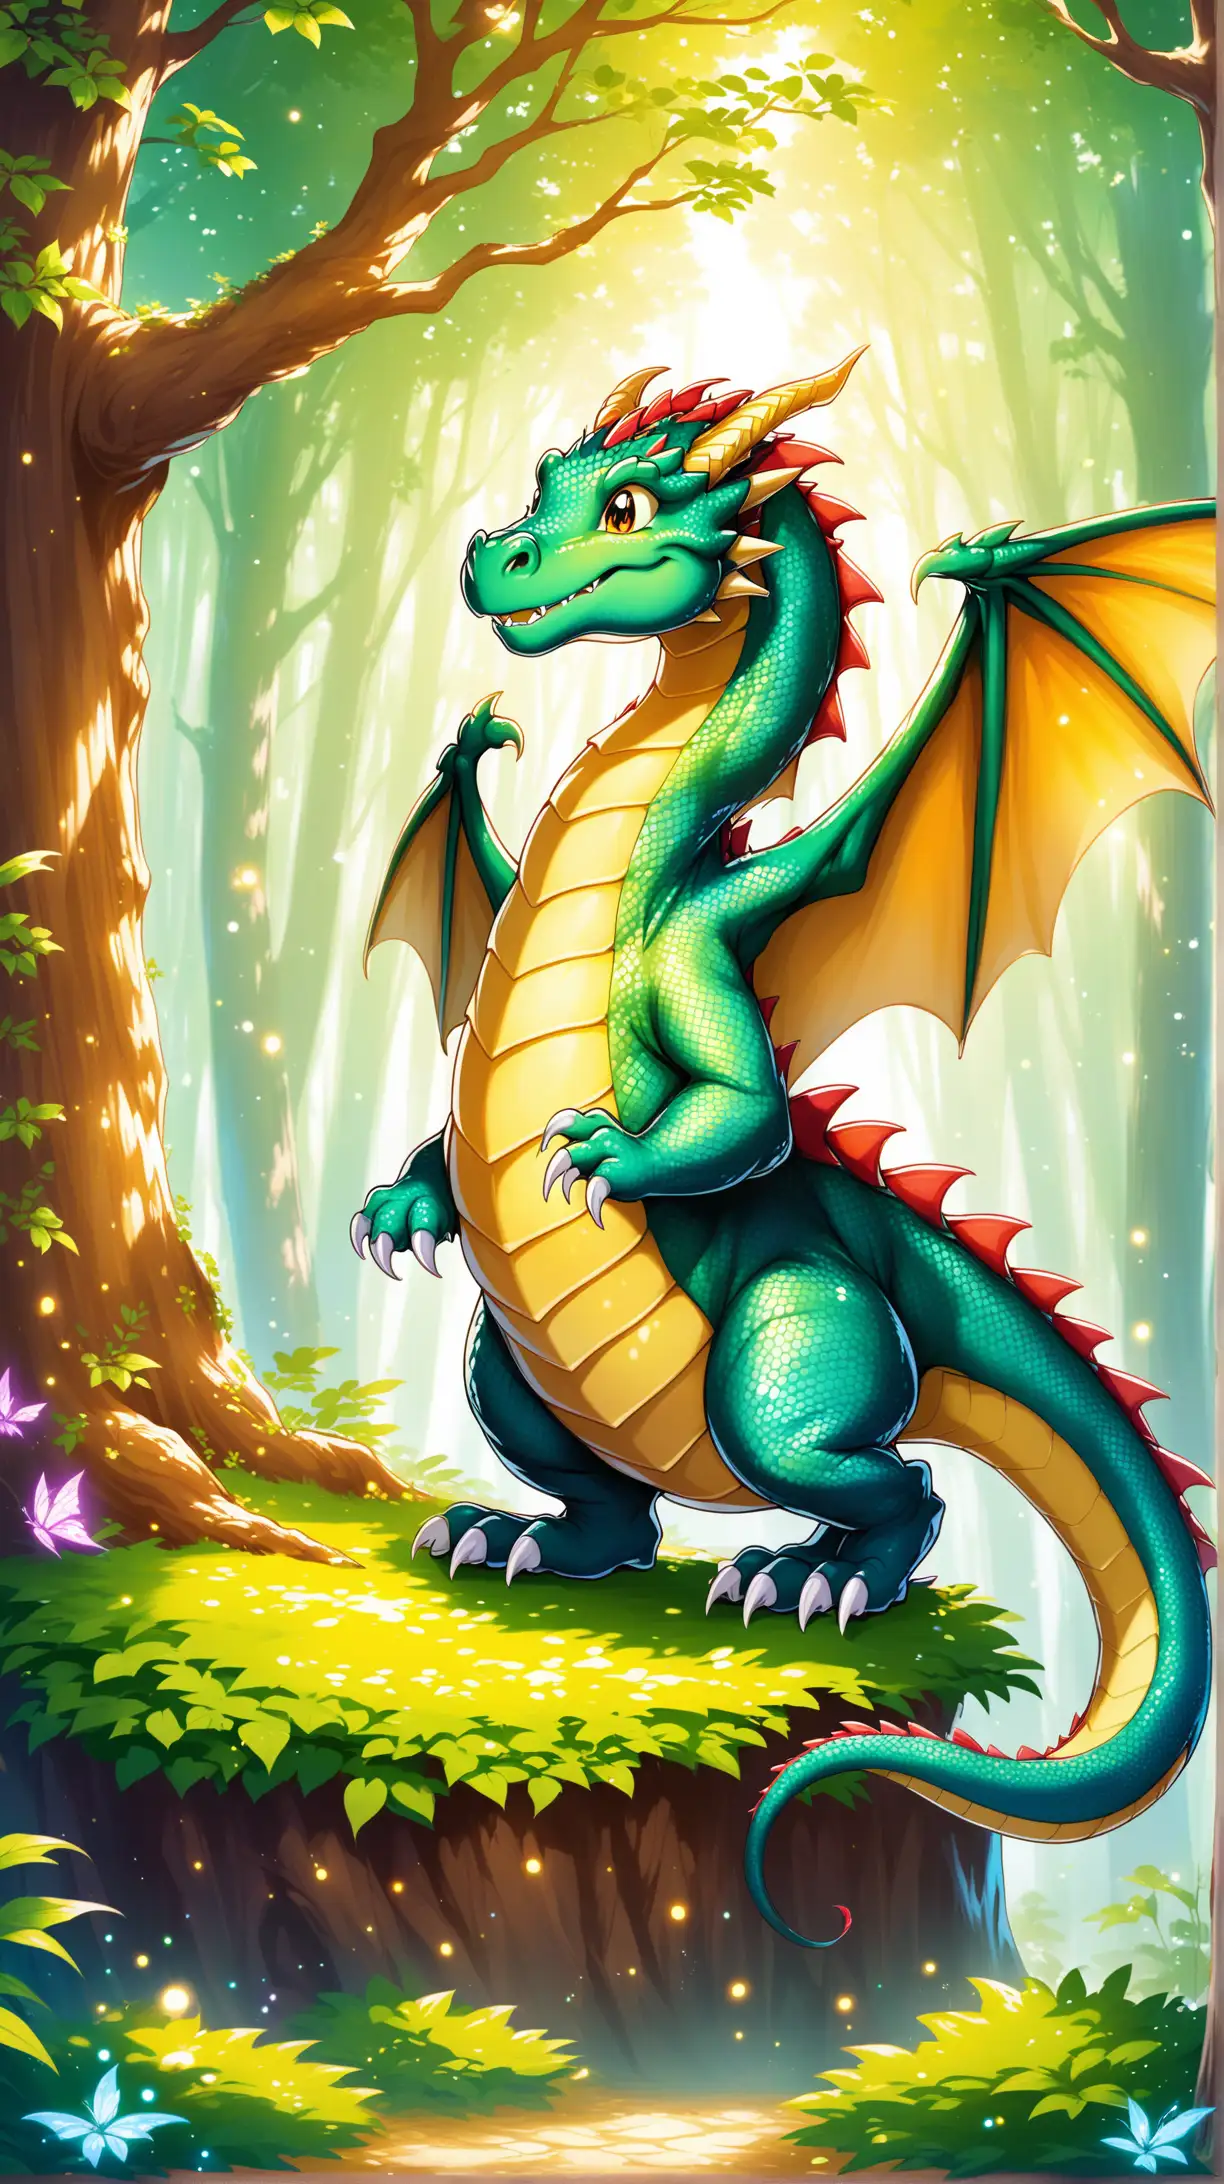 A friendly dragon in a magical forest